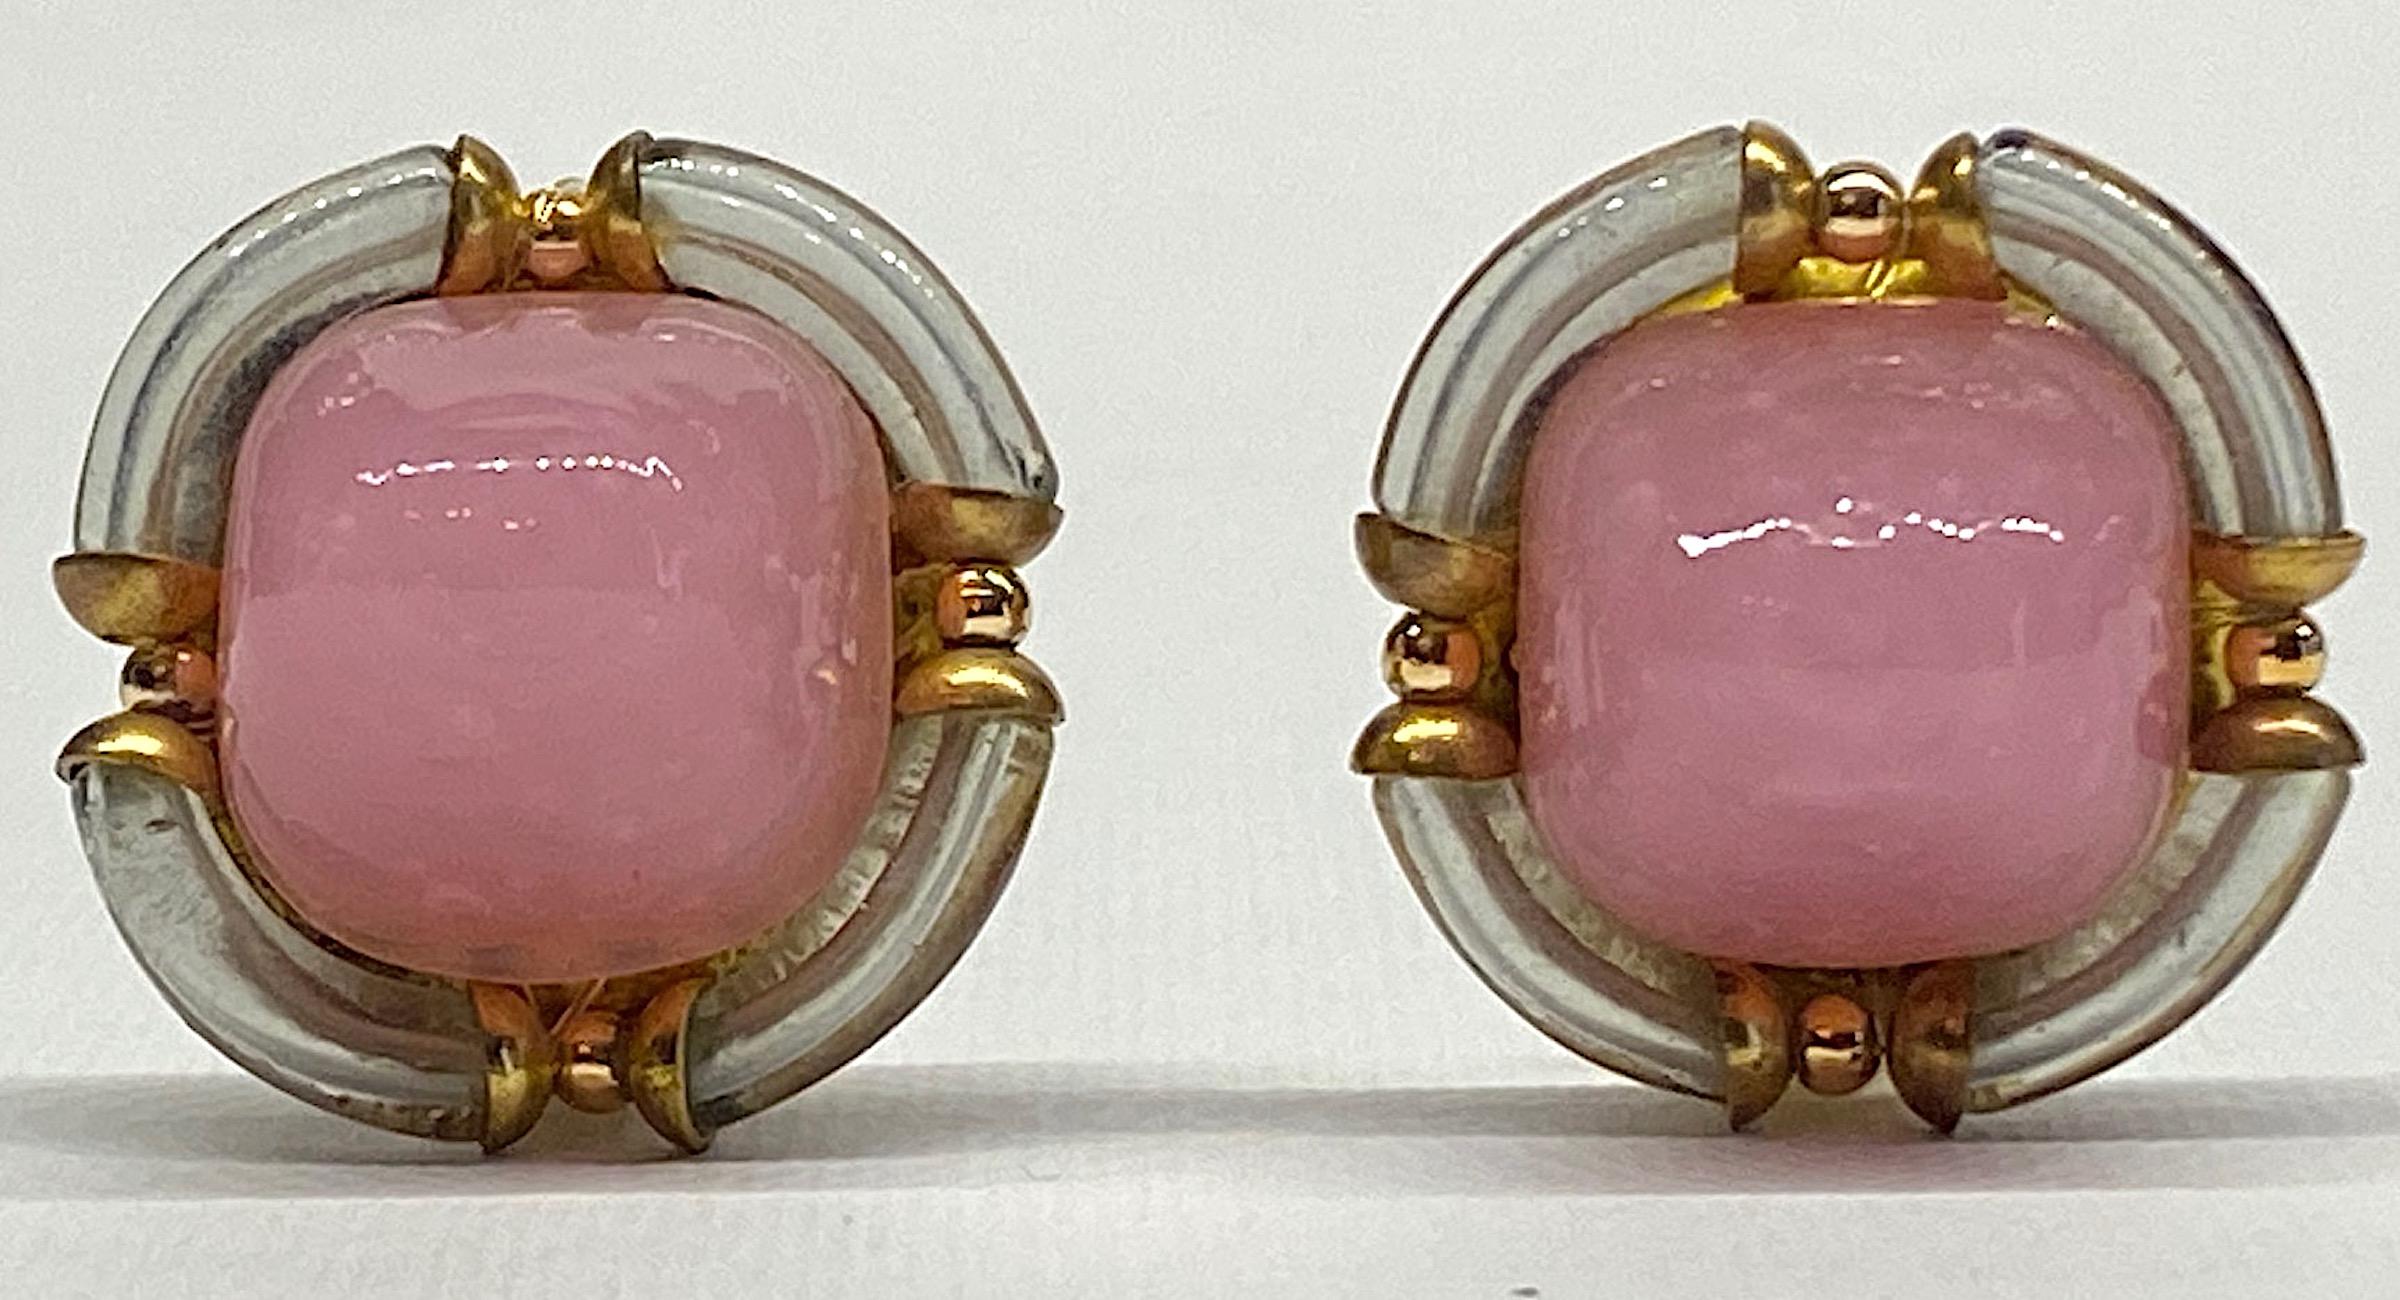 A rare pair of pink and grey glass earrings by famous Italian glass designer Archimede Seguso circa 1960. The button style model is rarely found unlike the other model of interlocking 